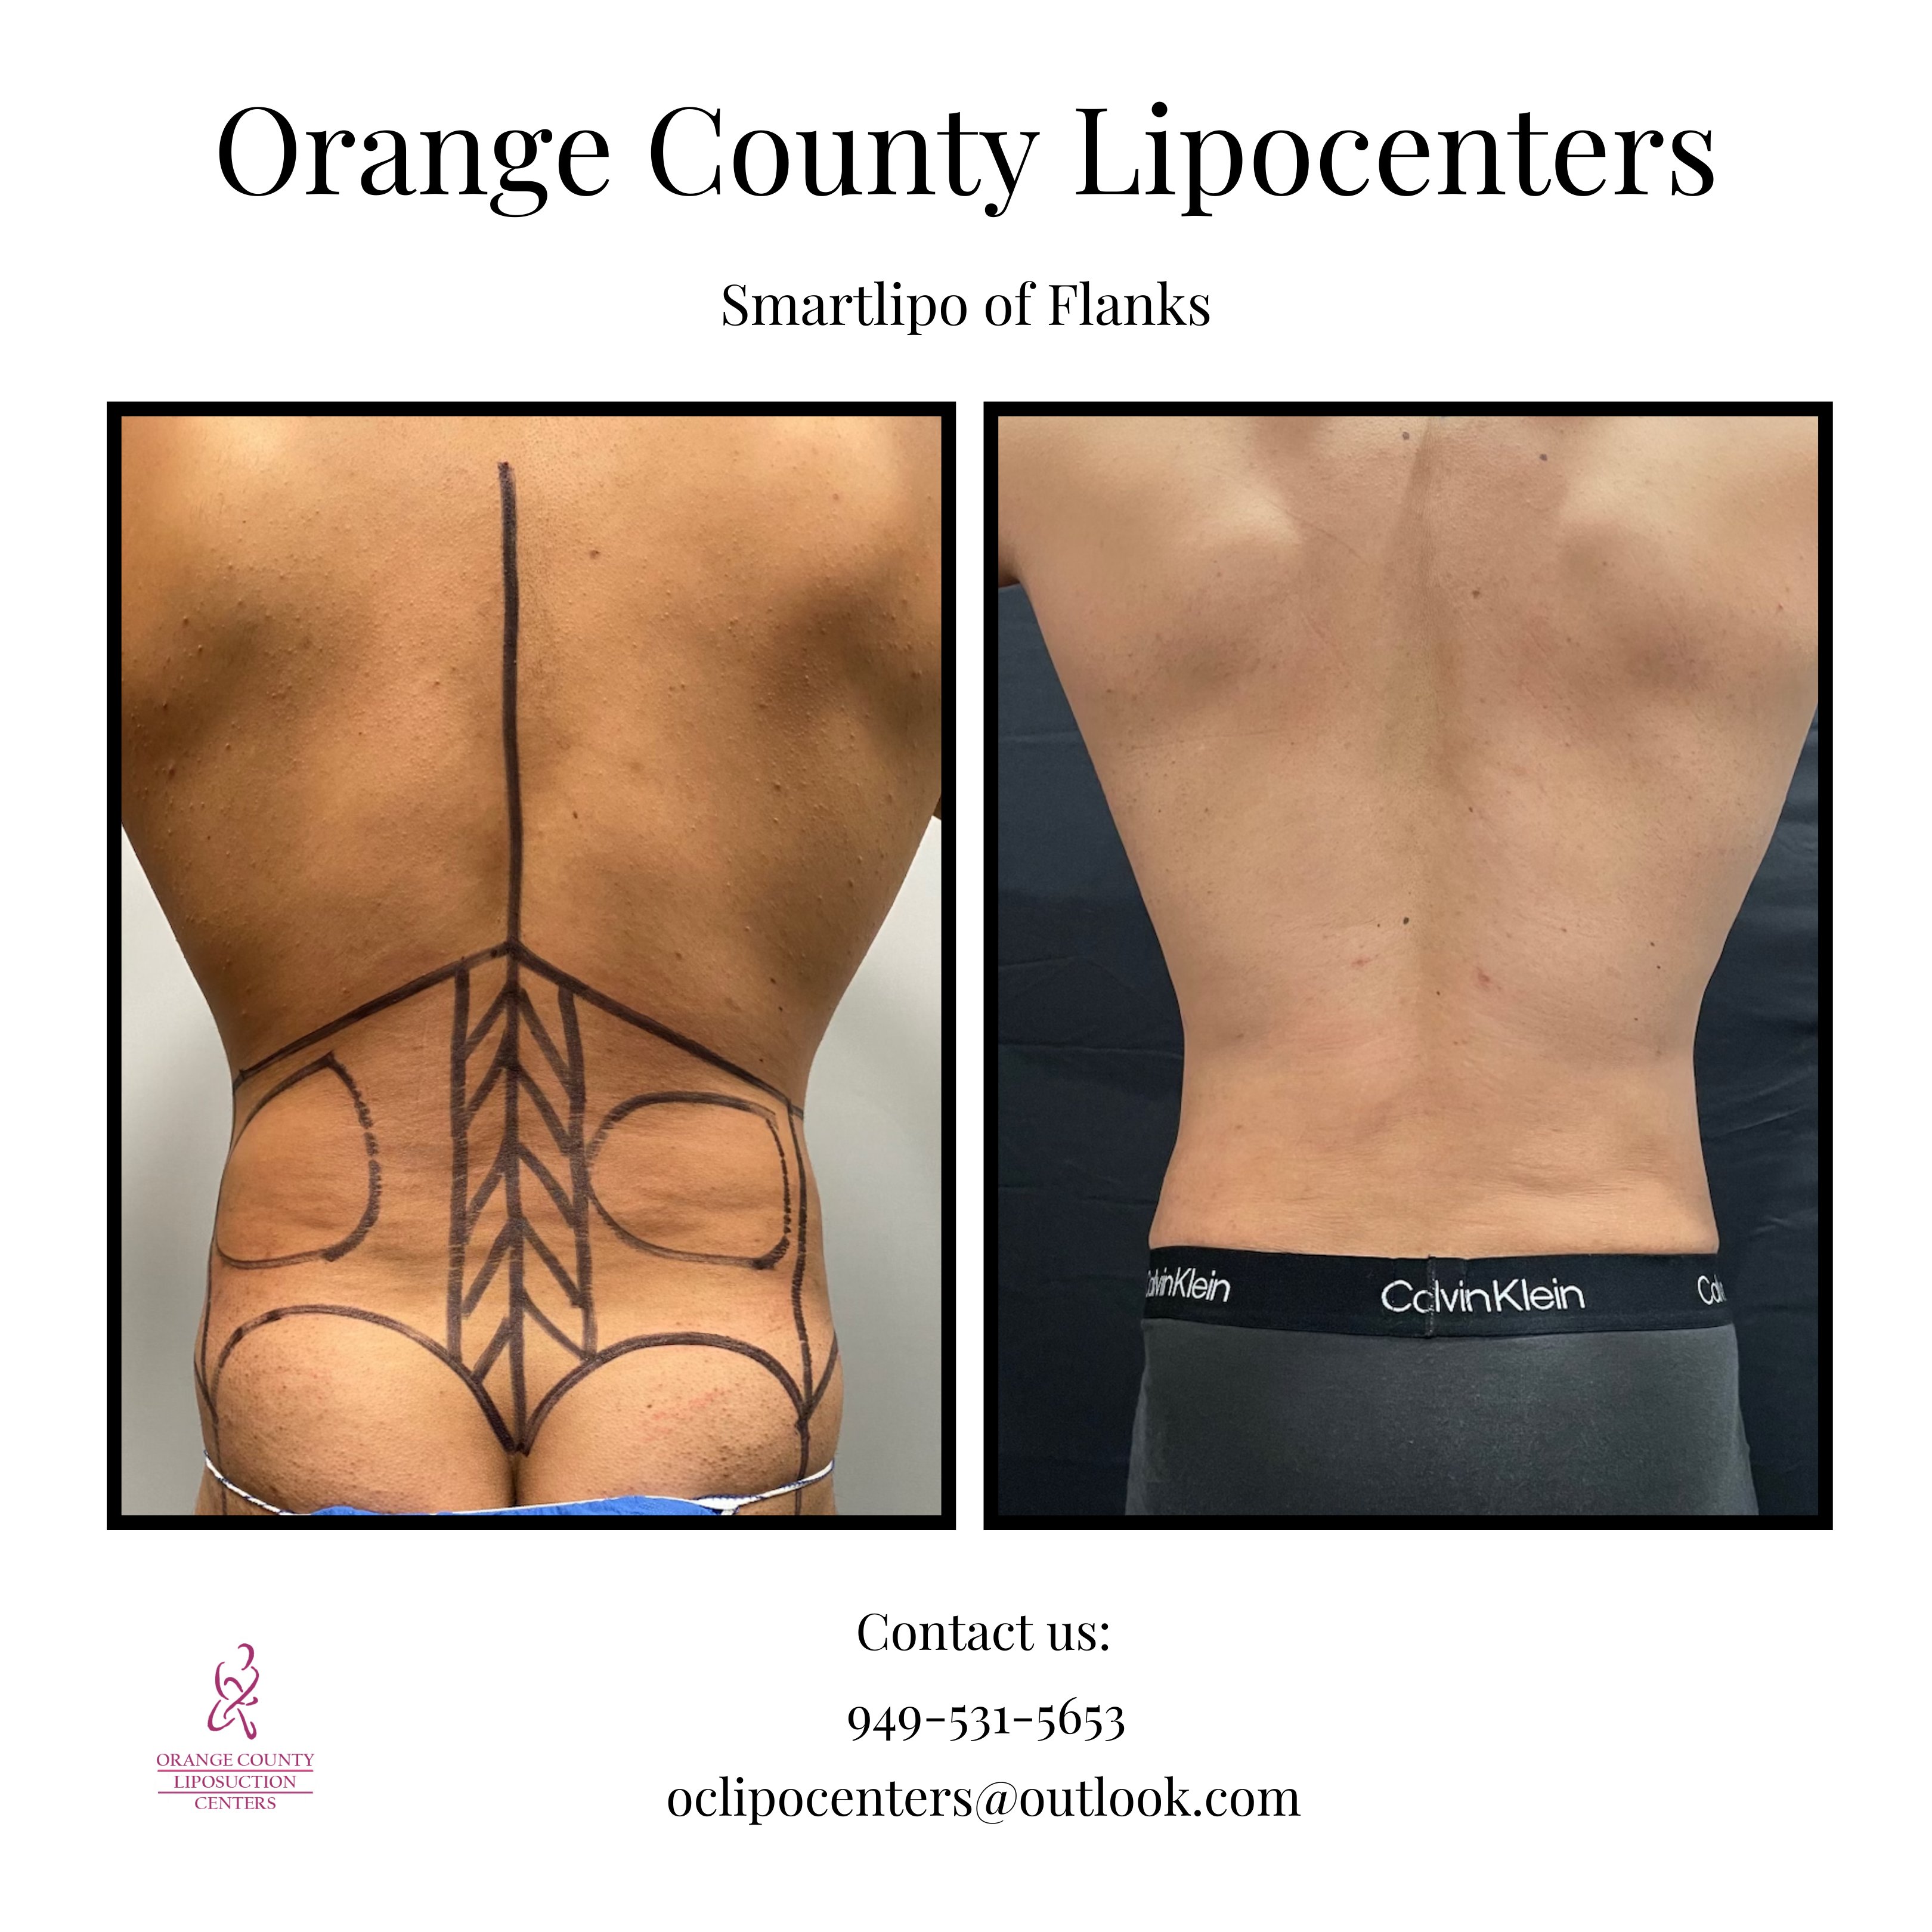 Los Angeles Liposuction Centers on X: Male patient came in for Smartlipo  of his flanks. He wanted to achieve a muscular, more defined look.  Smartlipo is an amazing procedure not only for